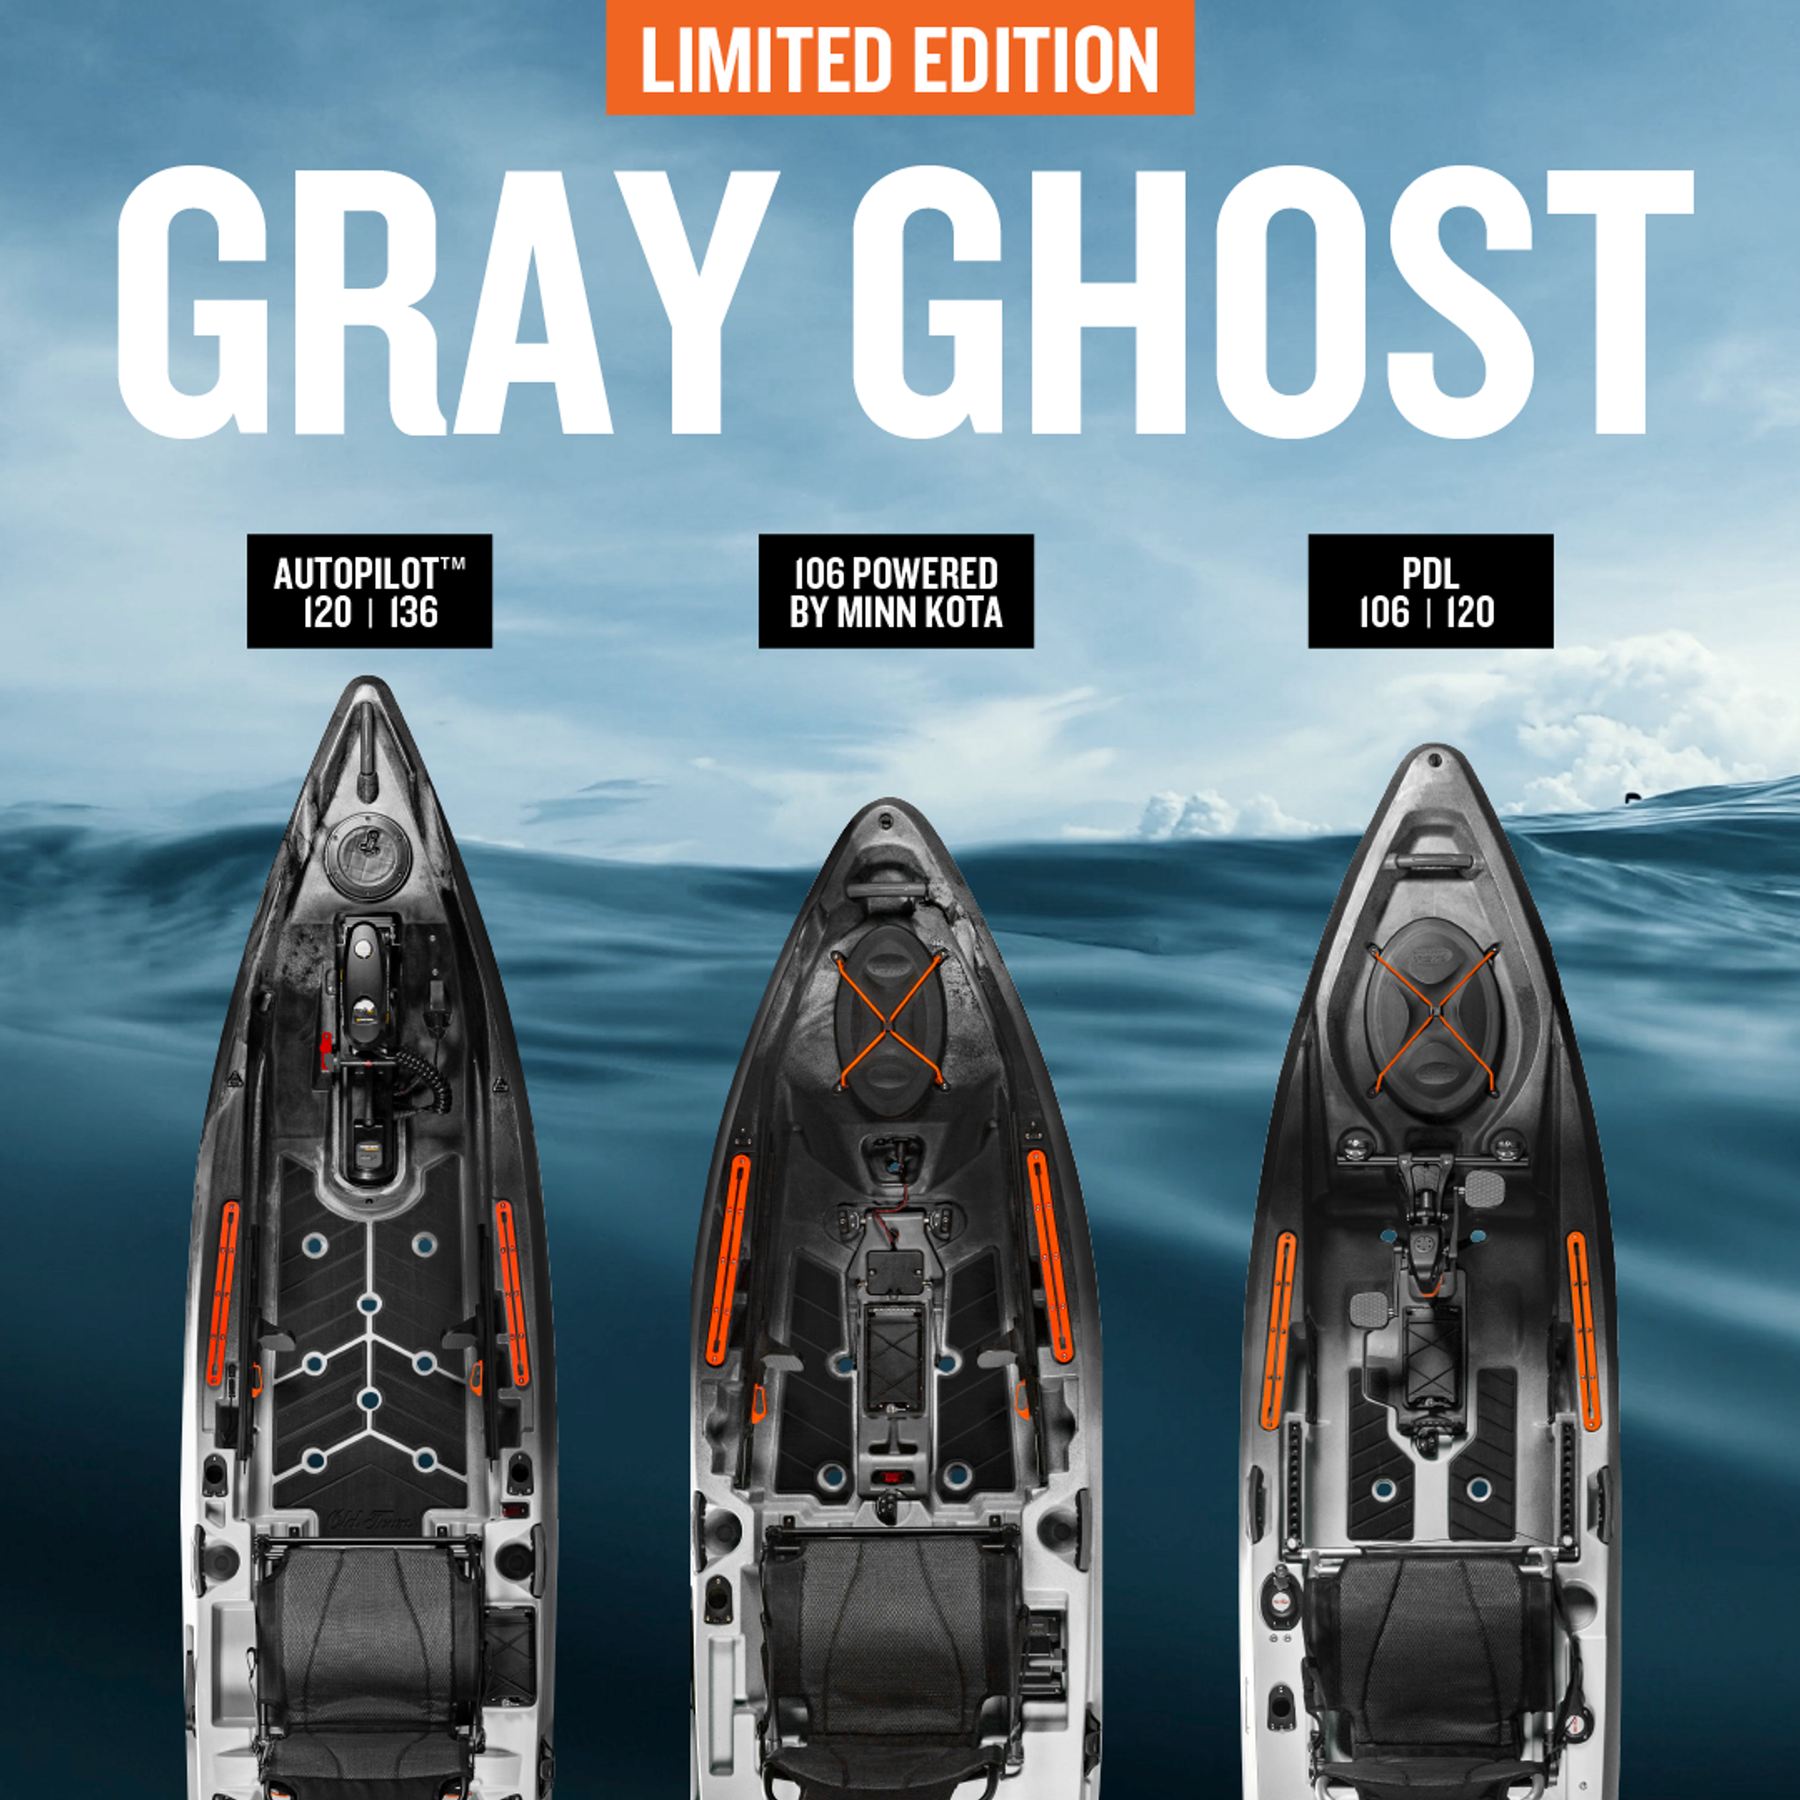 Meet the Old Town Limited Edition Gray Ghost Kayaks